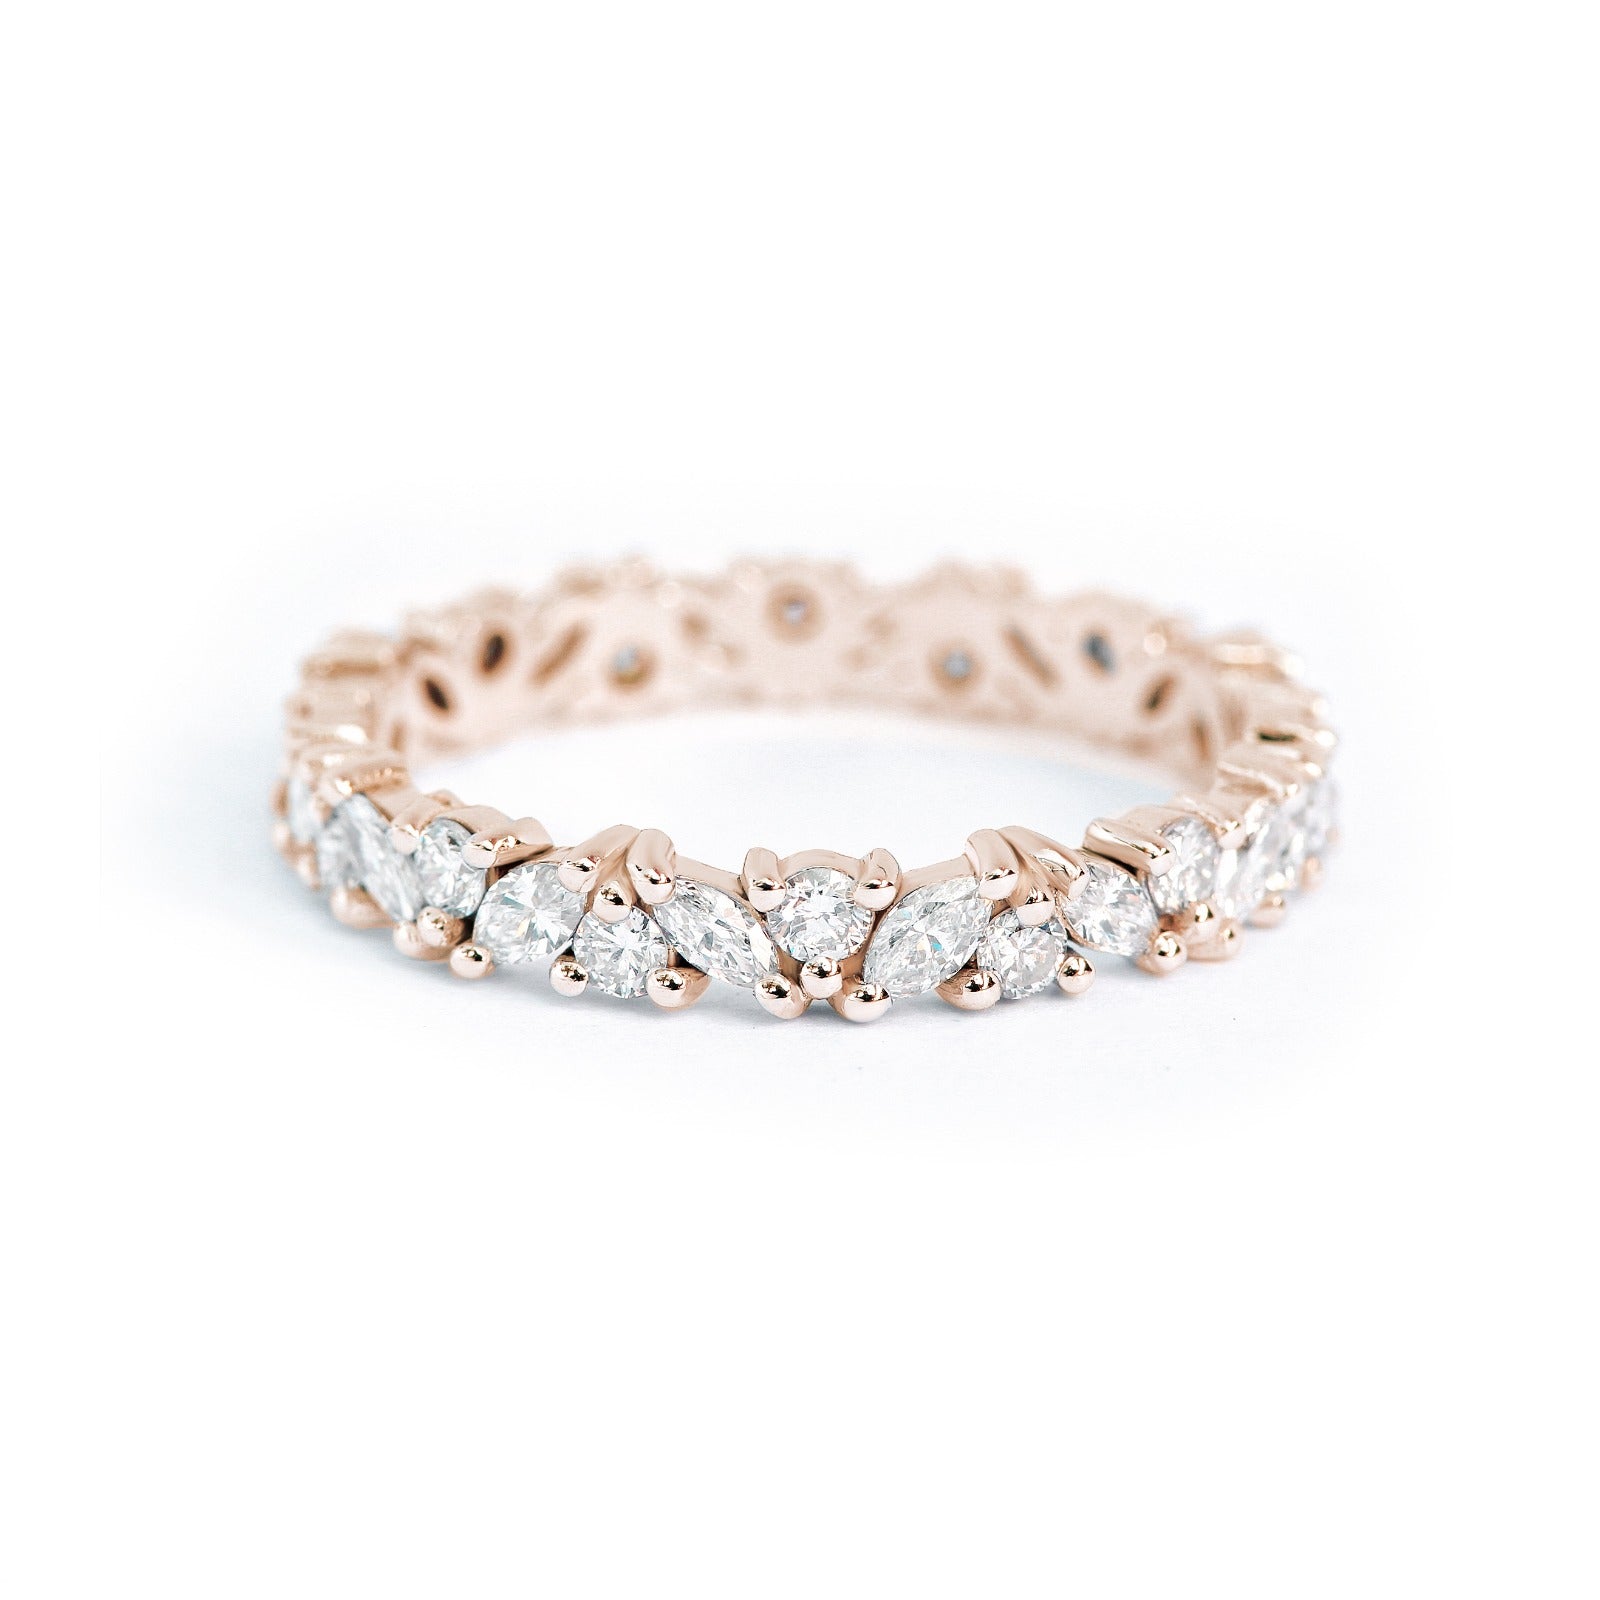 Buy Marquise Round Diamond Wedding Ring: Anya HALF Eternity Band. Available  in 14k, 18k Gold or Platinum. 3 Different Carat Sizes Online in India - Etsy